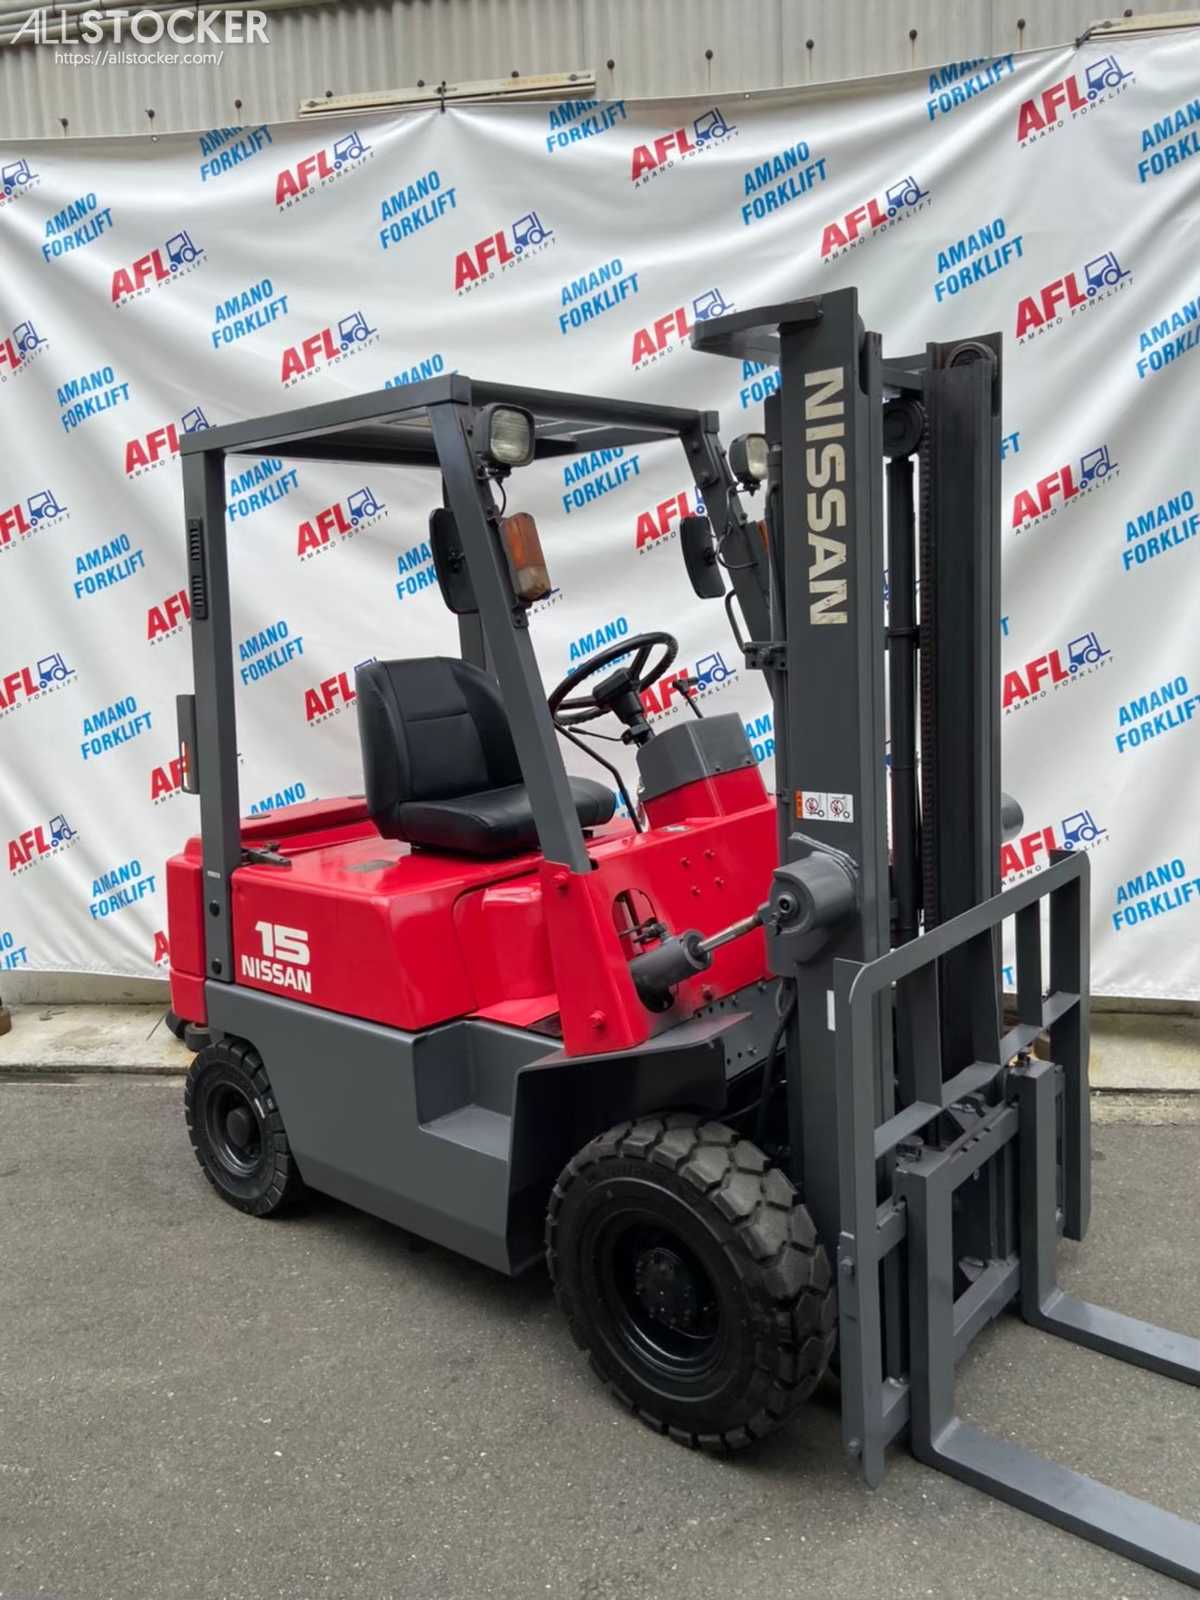 Nissan Nj01 Forklifts 1998y 708h Osaka Used Construction Equipment Vehicles And Farm Machinery For Sale Allstocker